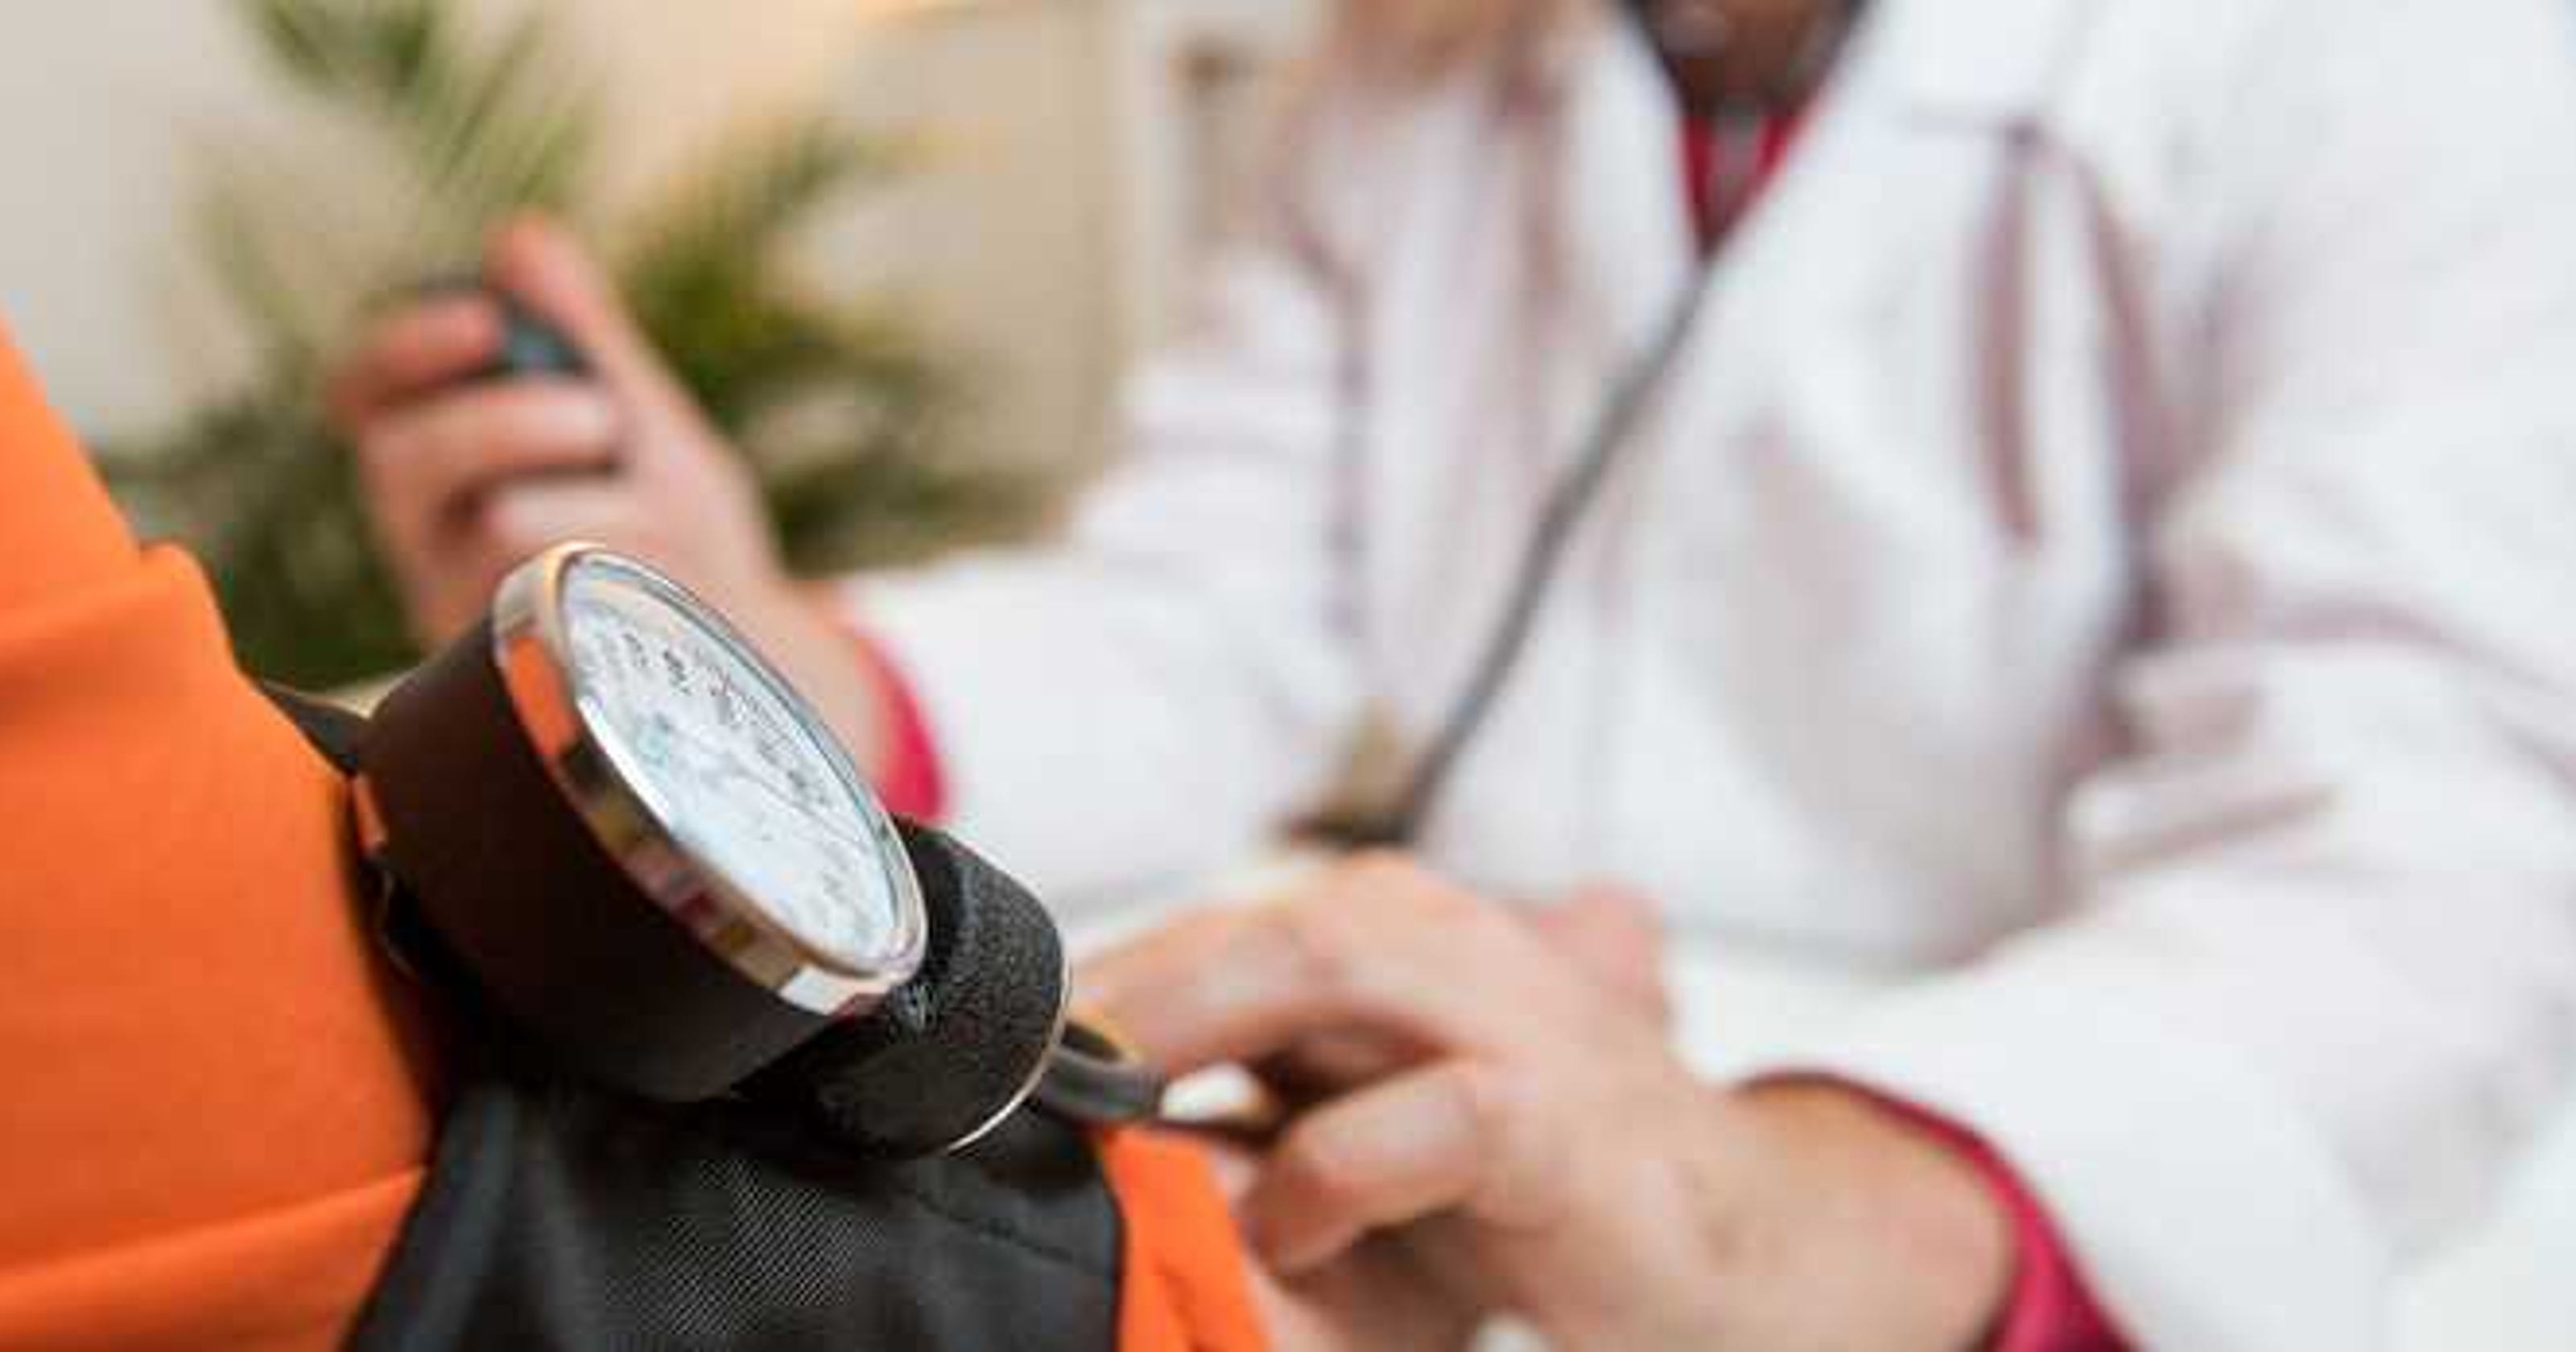 medicare-advantage-can-save-lives-by-covering-blood-pressure-monitors